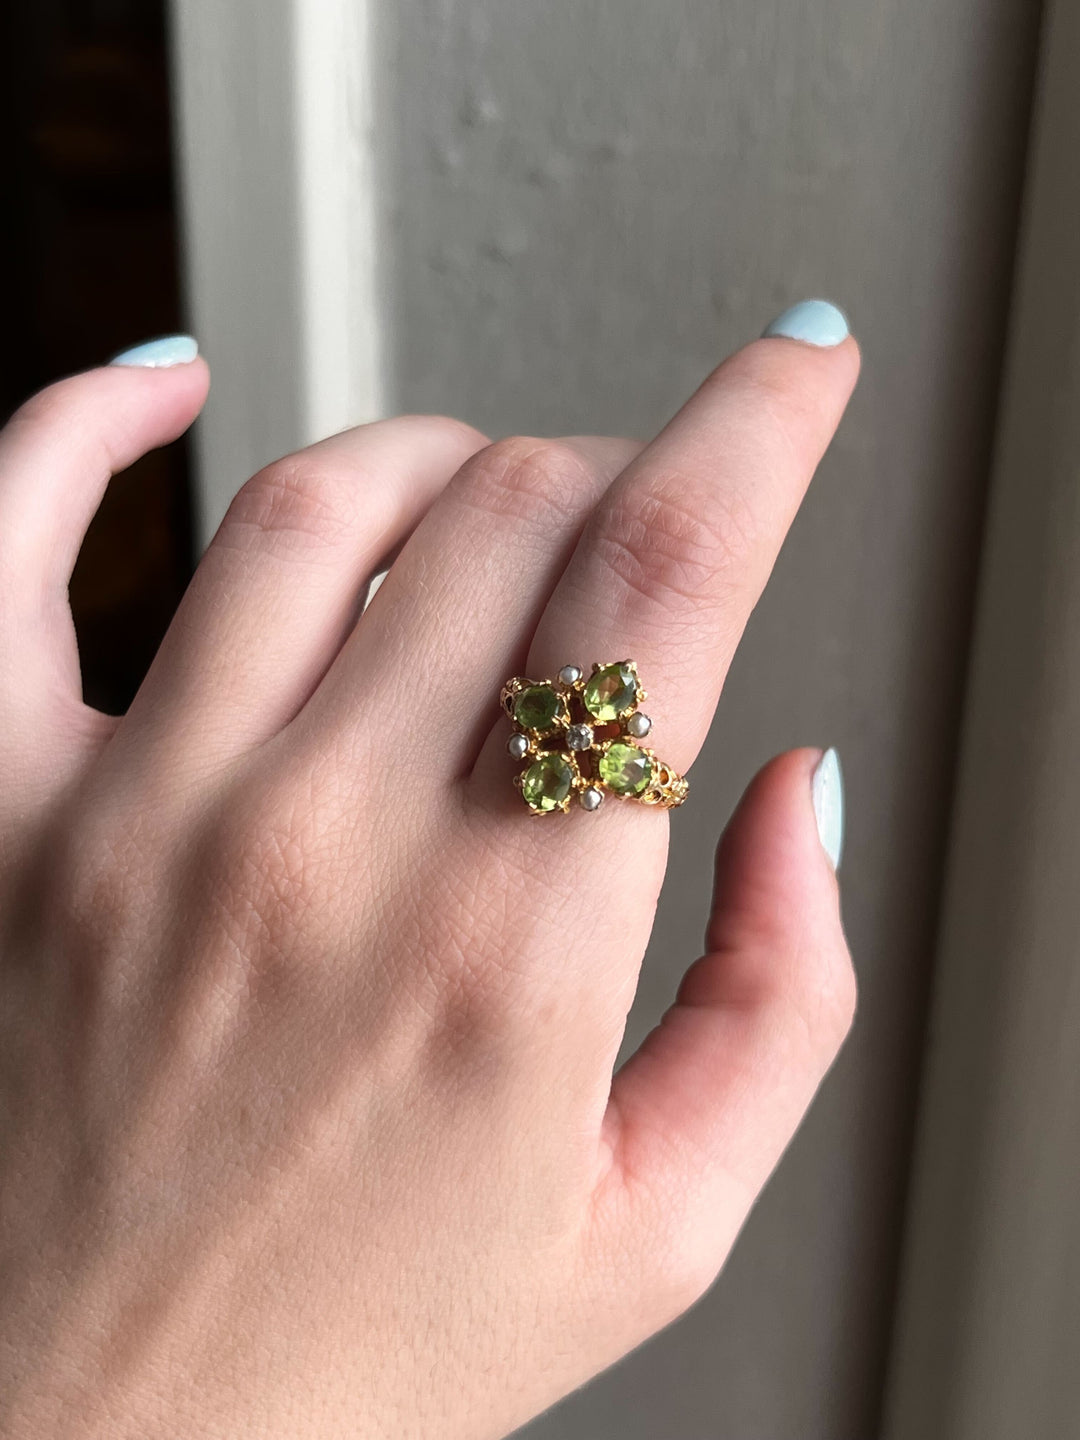 Stunning Vintage 9k Peridot and Pearl Maltese Cross Ring with Diamond Center